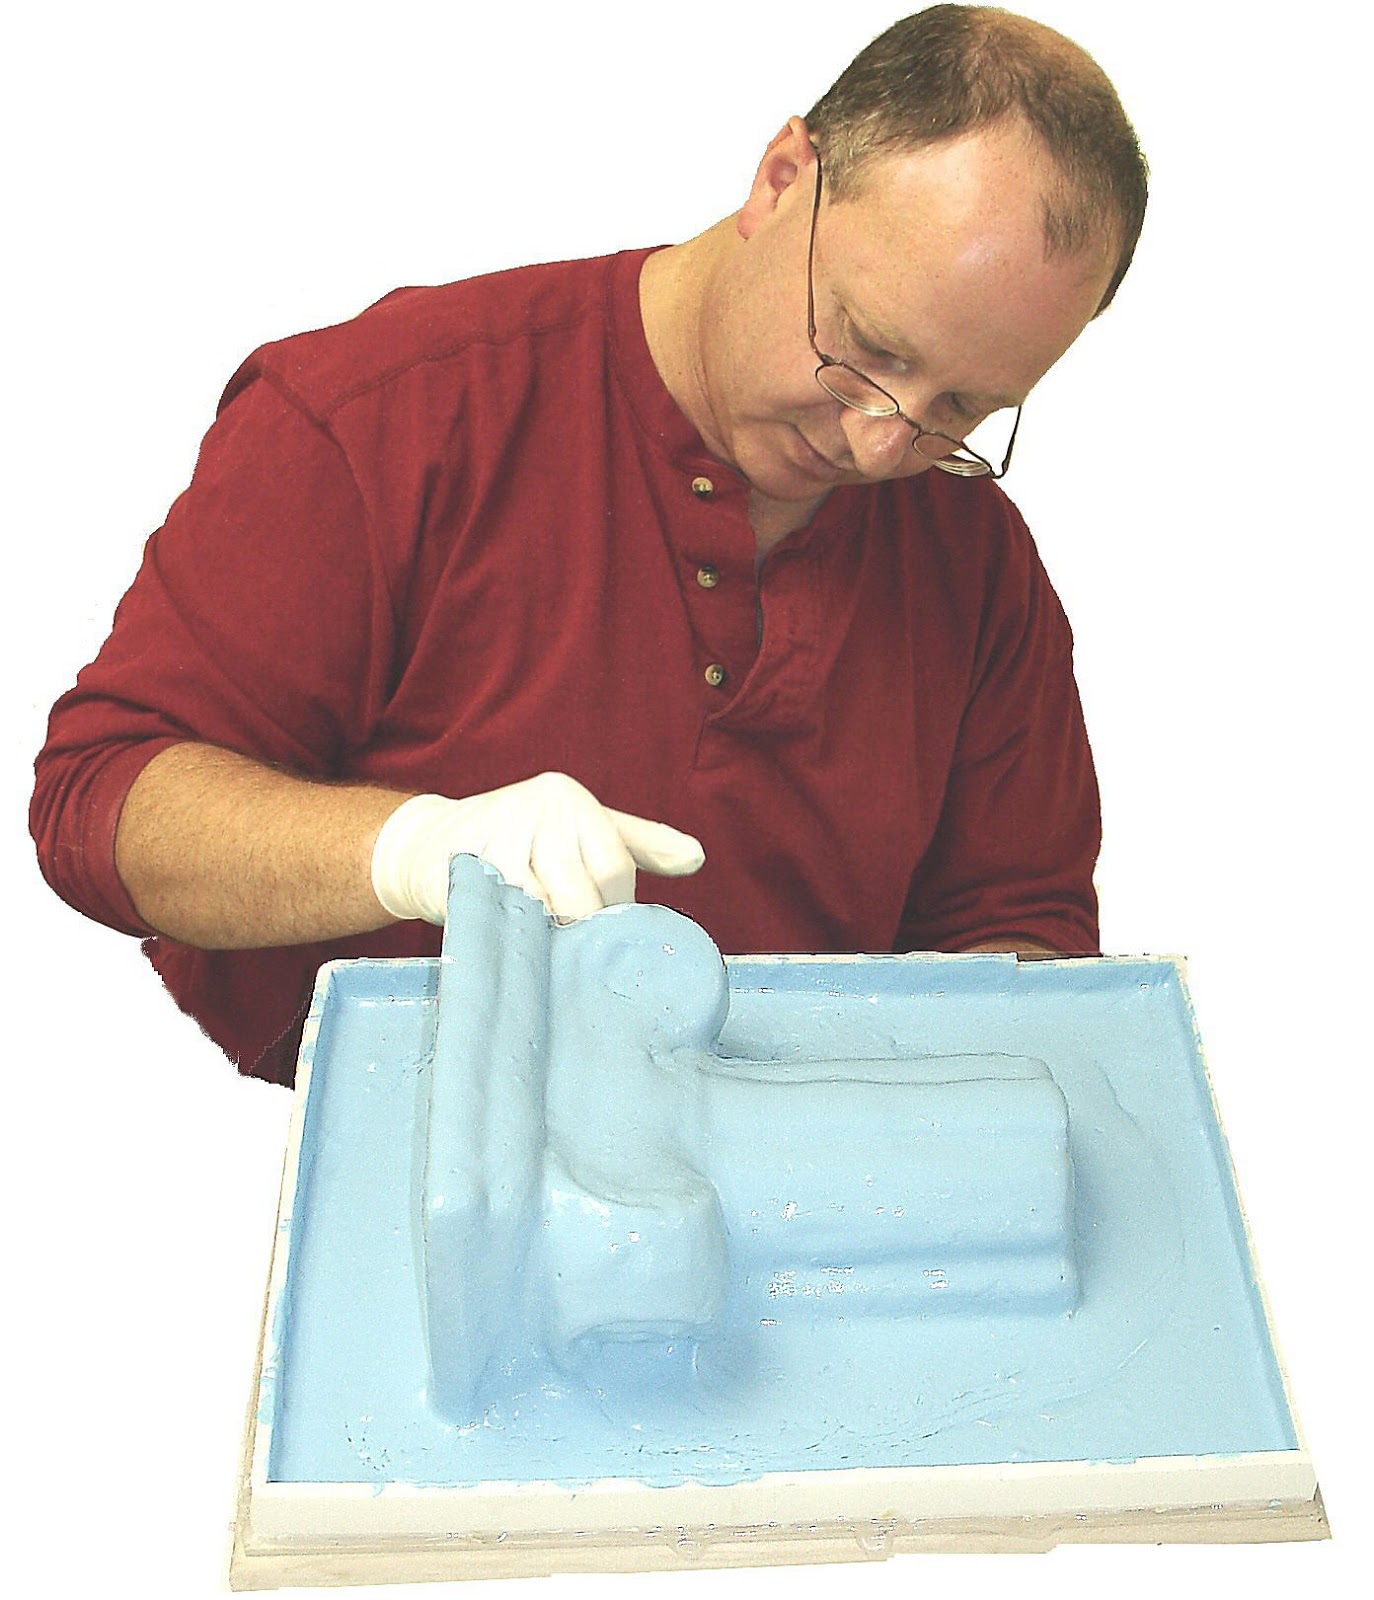 Mold making and Casting products through EnvironMolds, LLC: March 2018